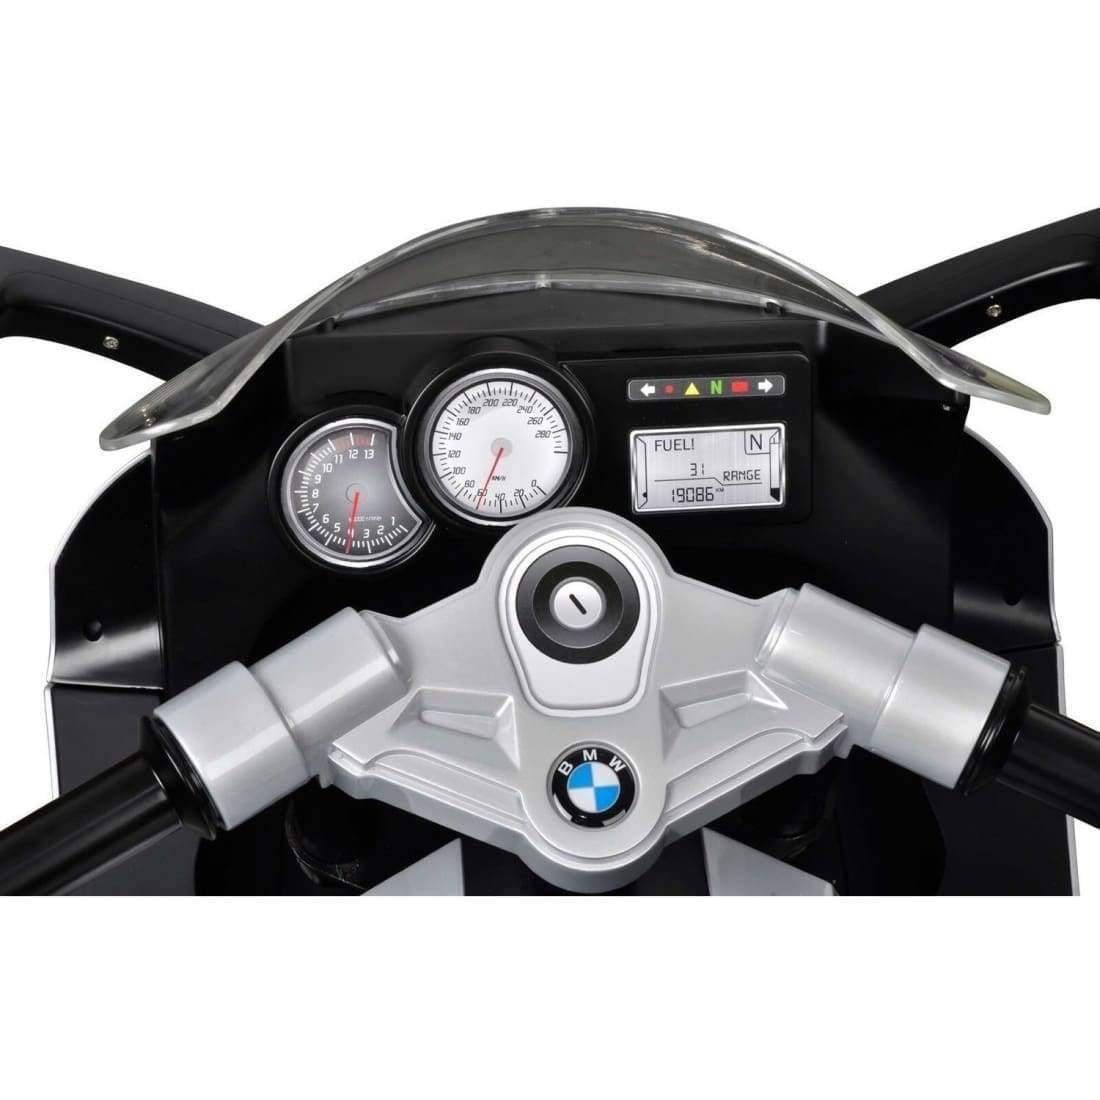 Best Ride On Cars Motorcycle Best Ride On Cars BMW 12V Motocycle Blue